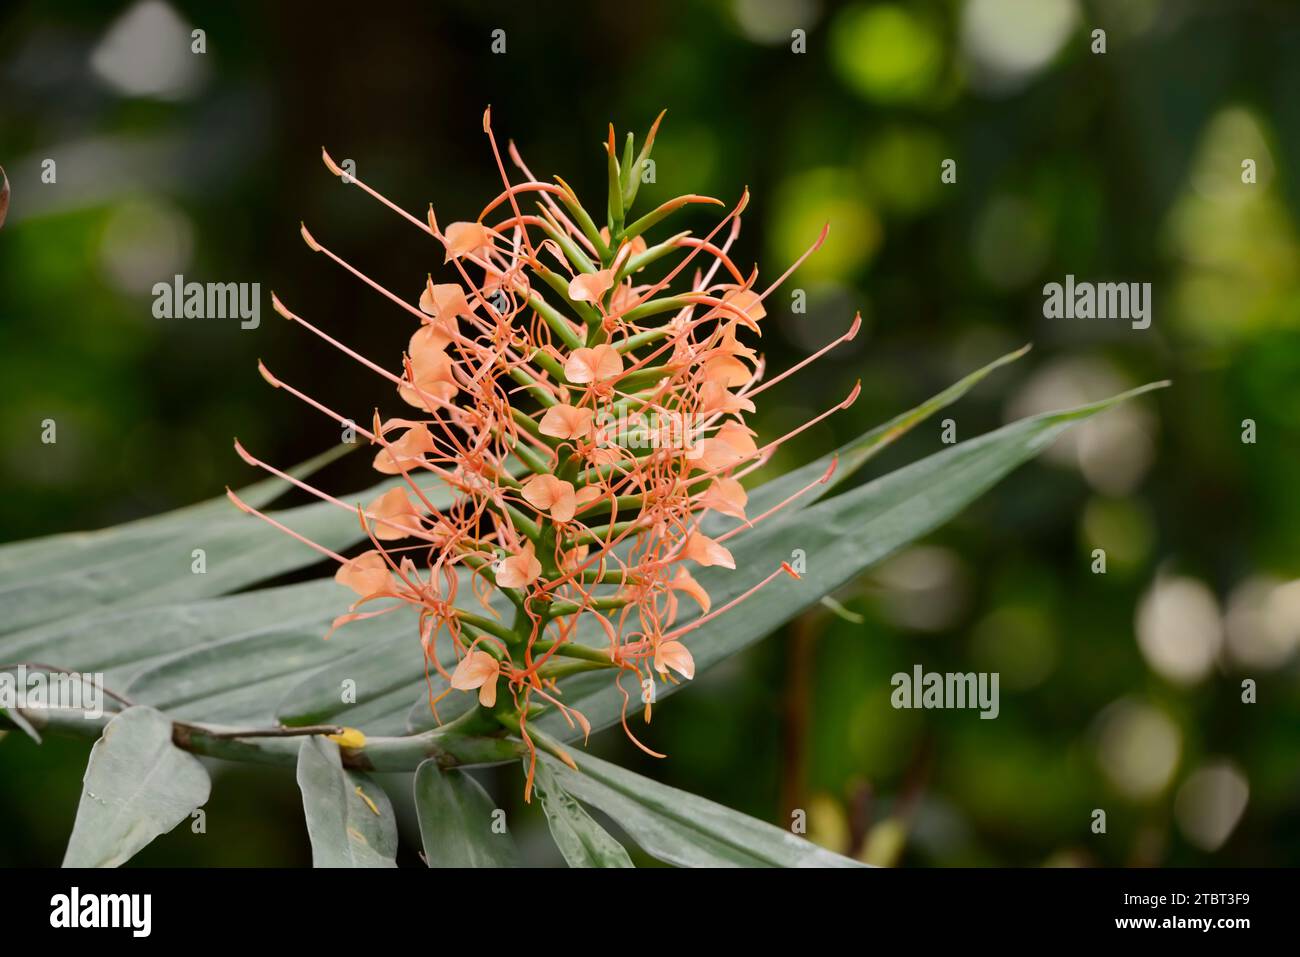 Scarlet ginger (Hedychium coccineum), inflorescence Stock Photo